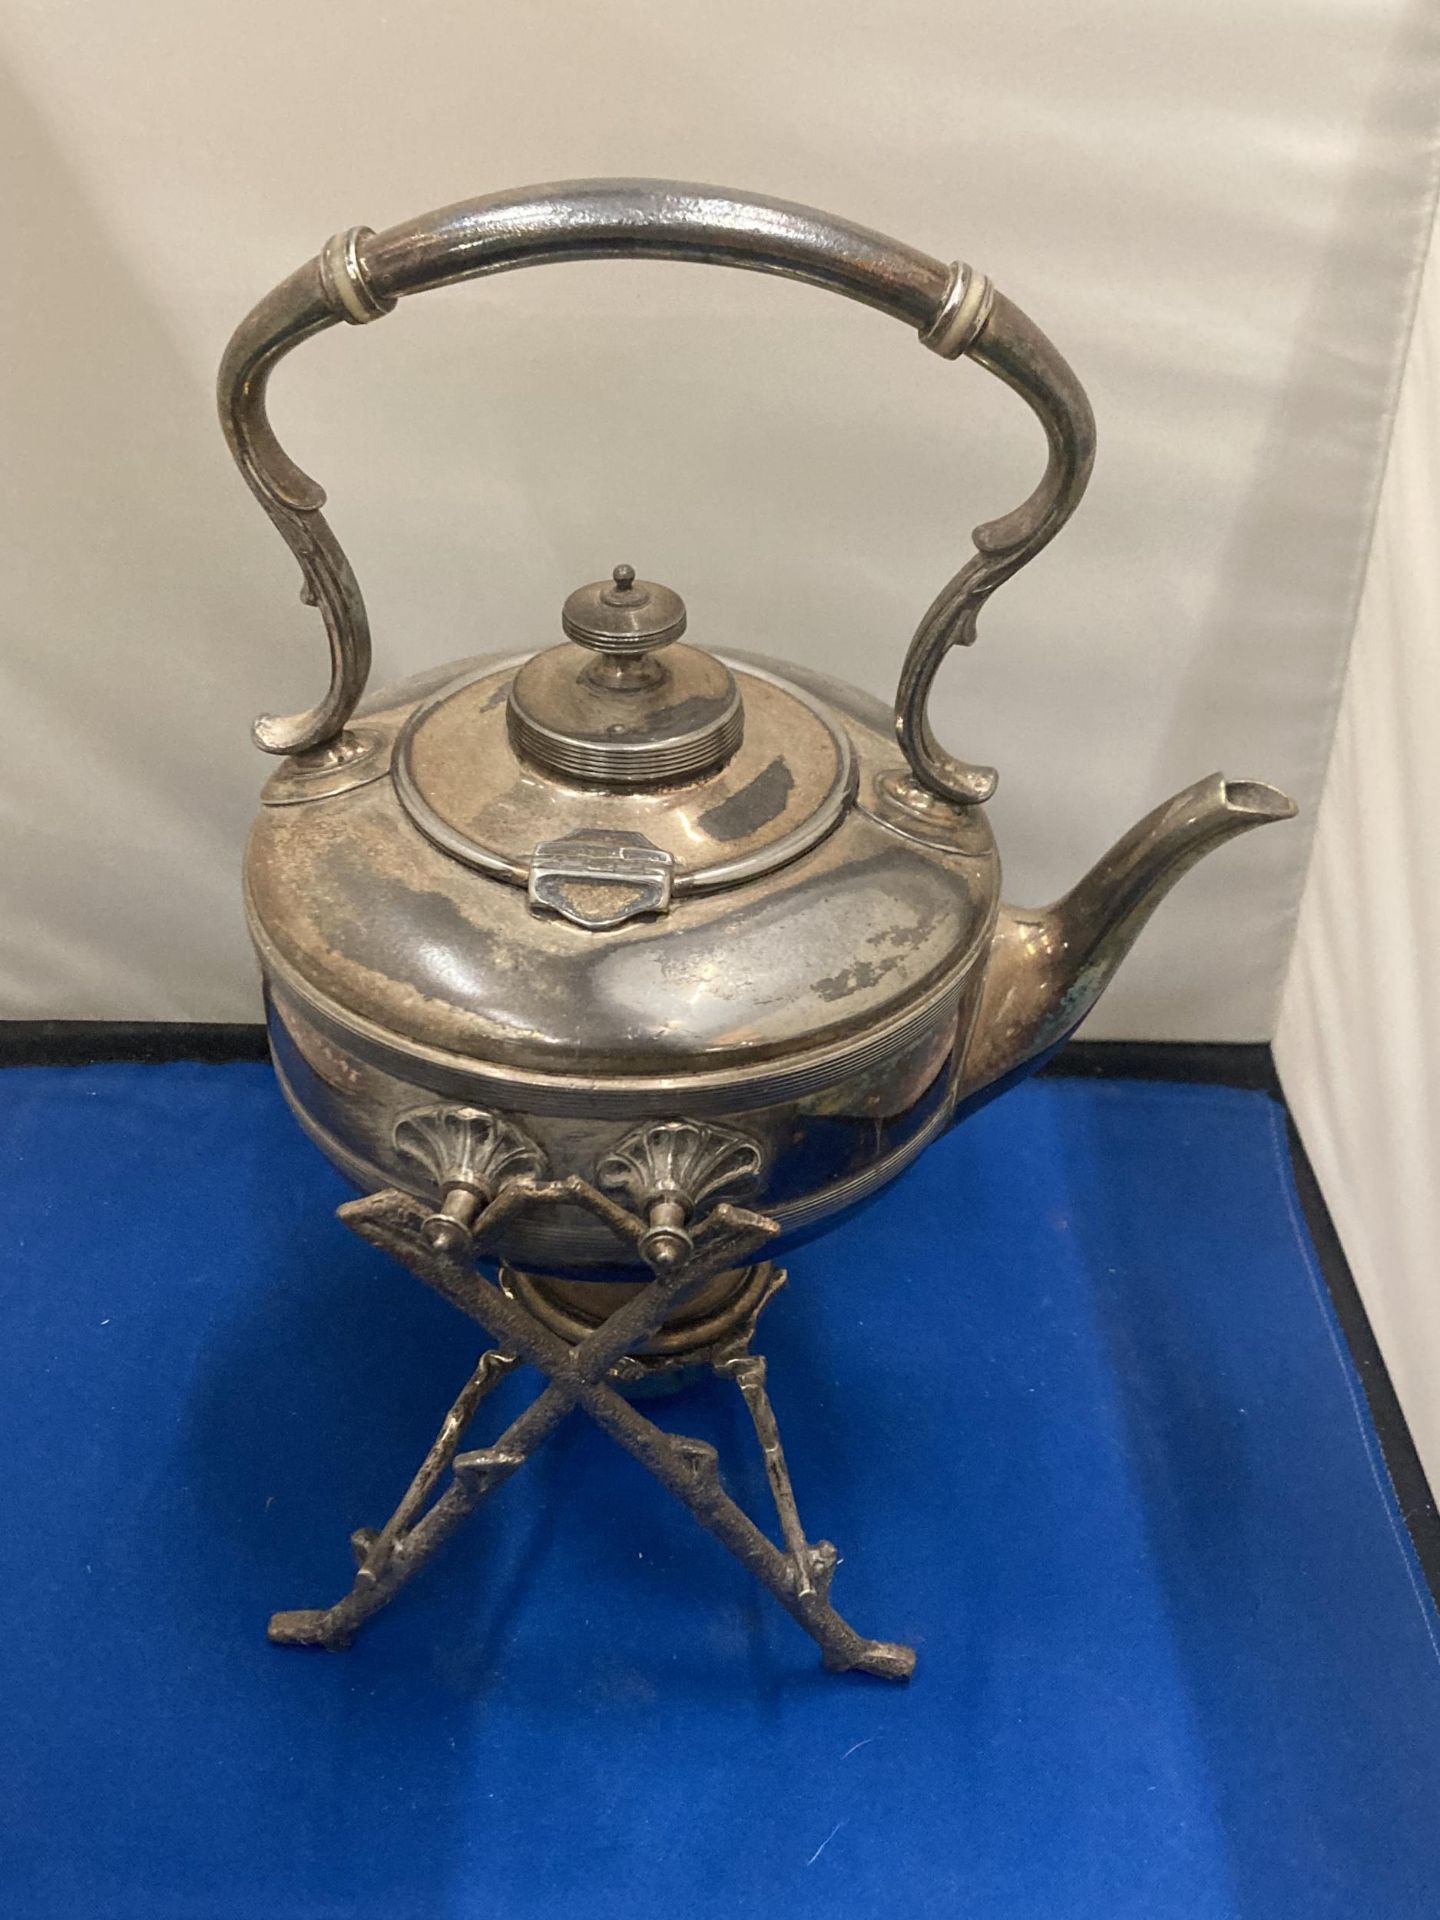 A SILVER PLATED SPIRIT KETTLE WITH FRAME AND BURNER - Image 2 of 4